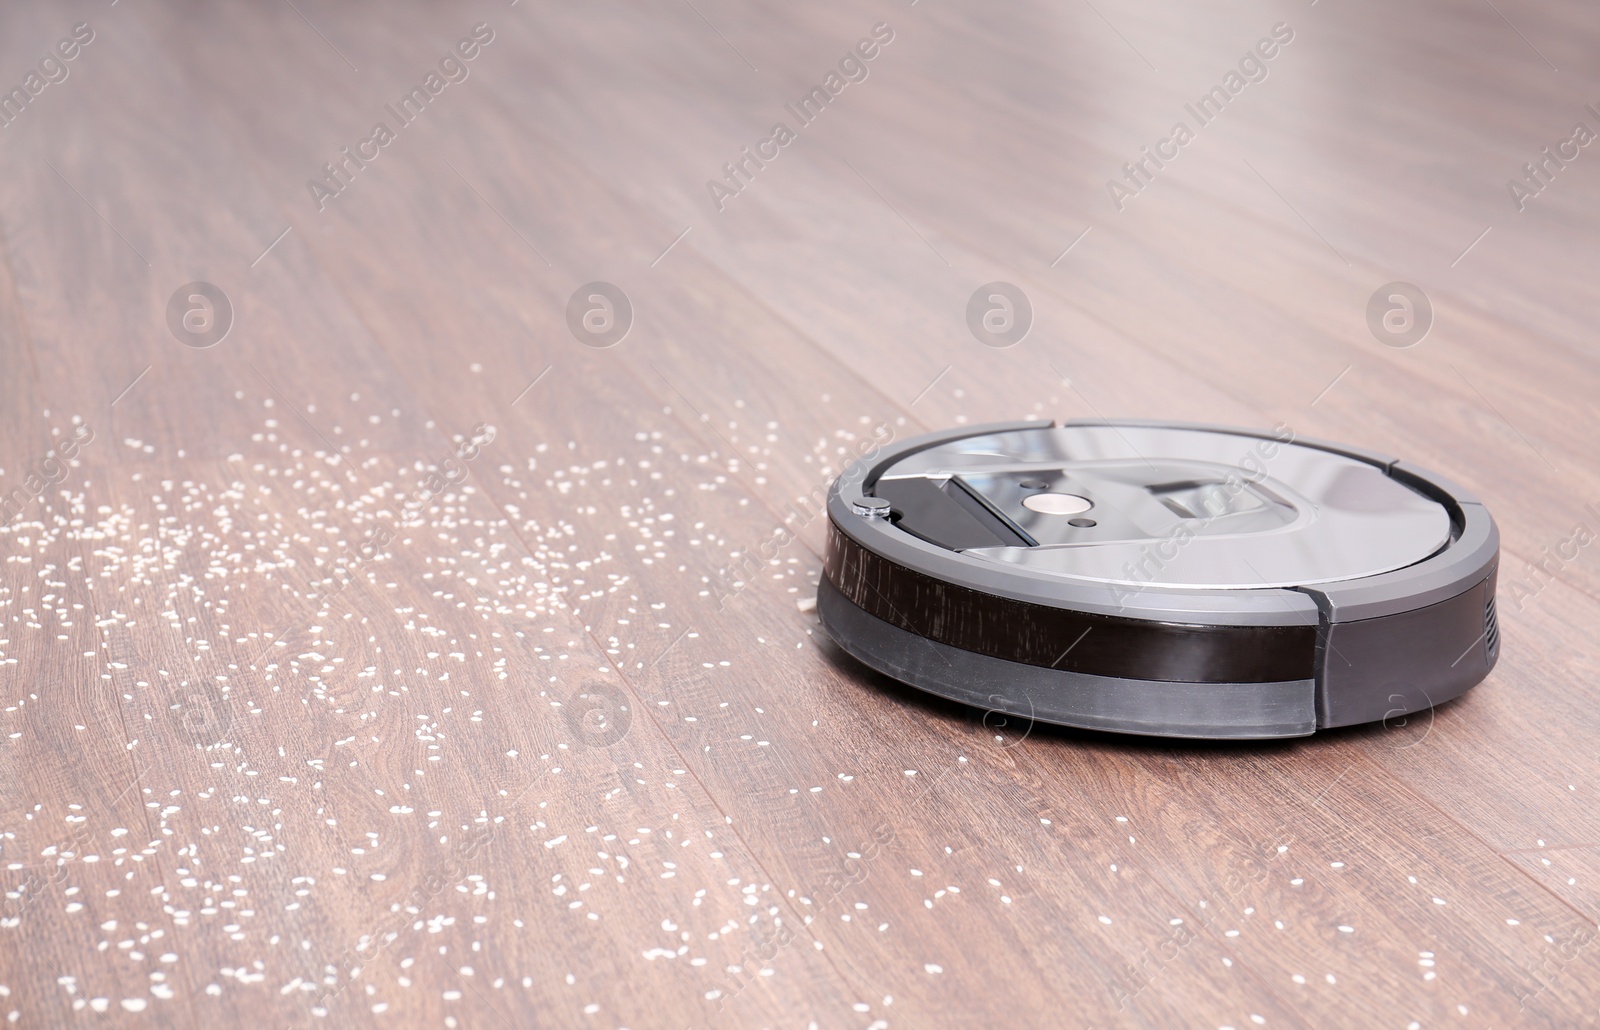 Photo of Removing groats from wooden floor with robotic vacuum cleaner at home. Space for text